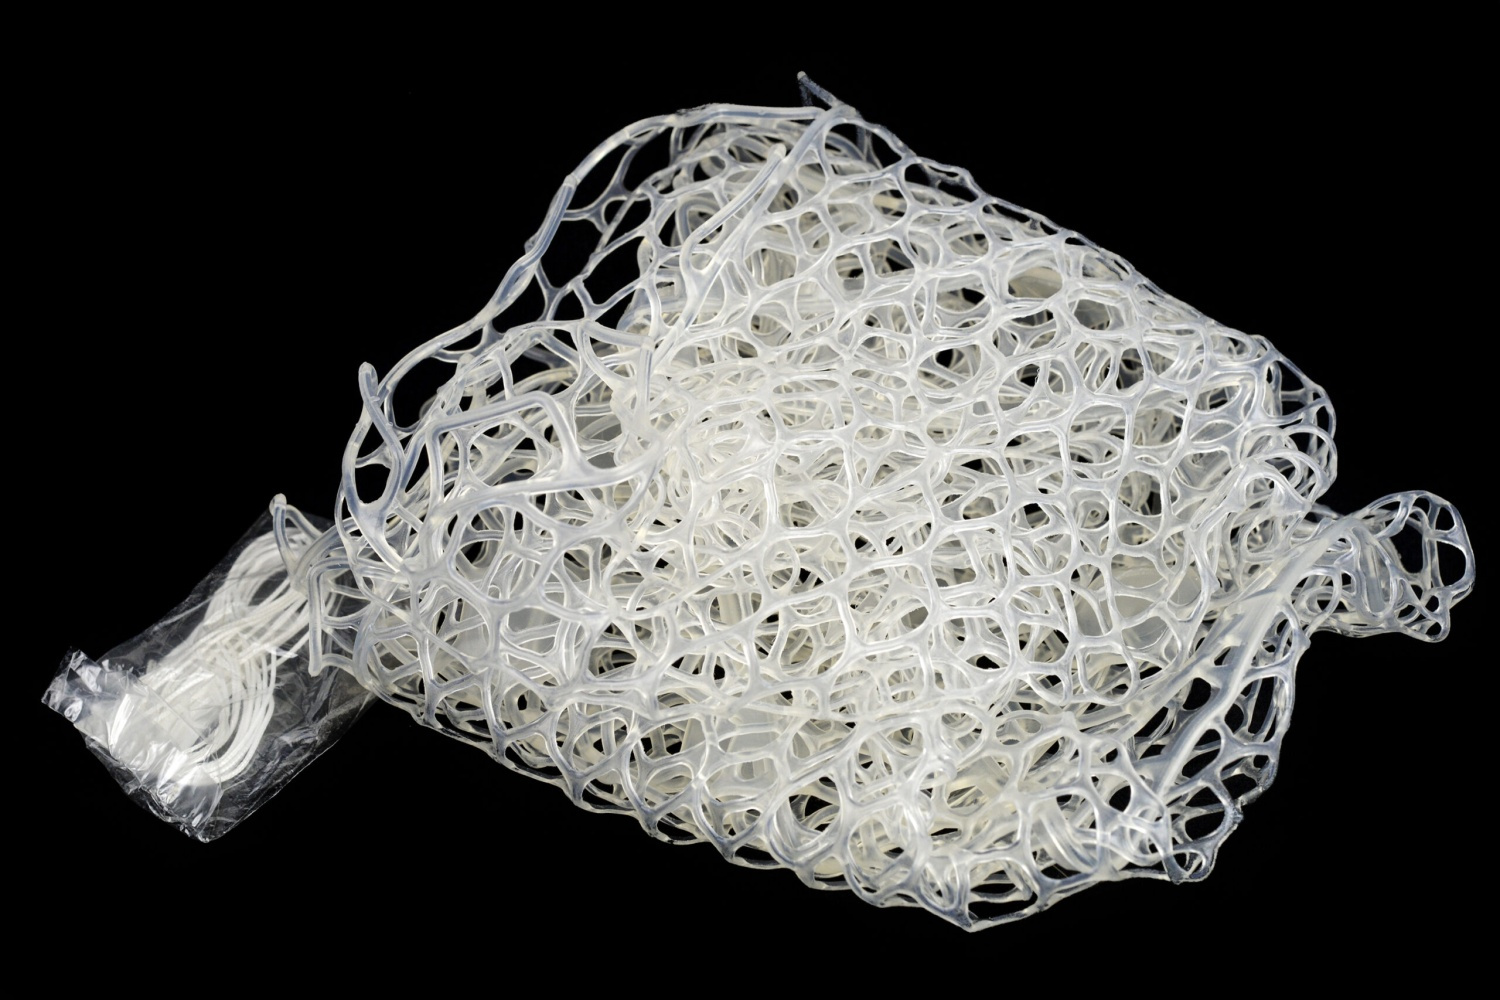 Brodin Extra Large Ghost Net Bag